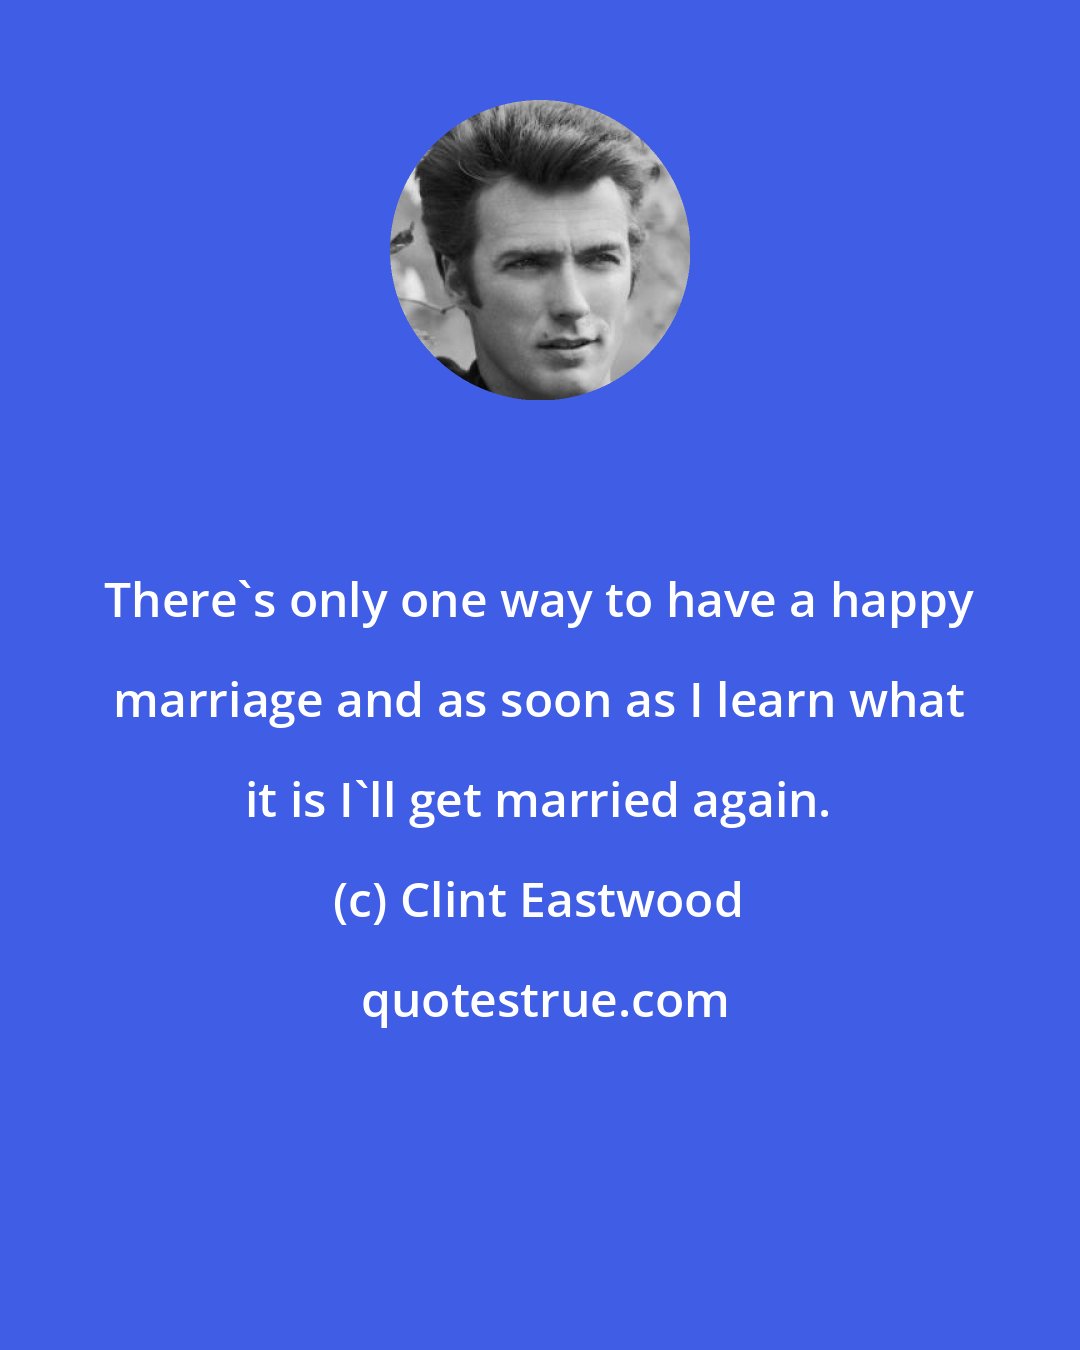 Clint Eastwood: There's only one way to have a happy marriage and as soon as I learn what it is I'll get married again.